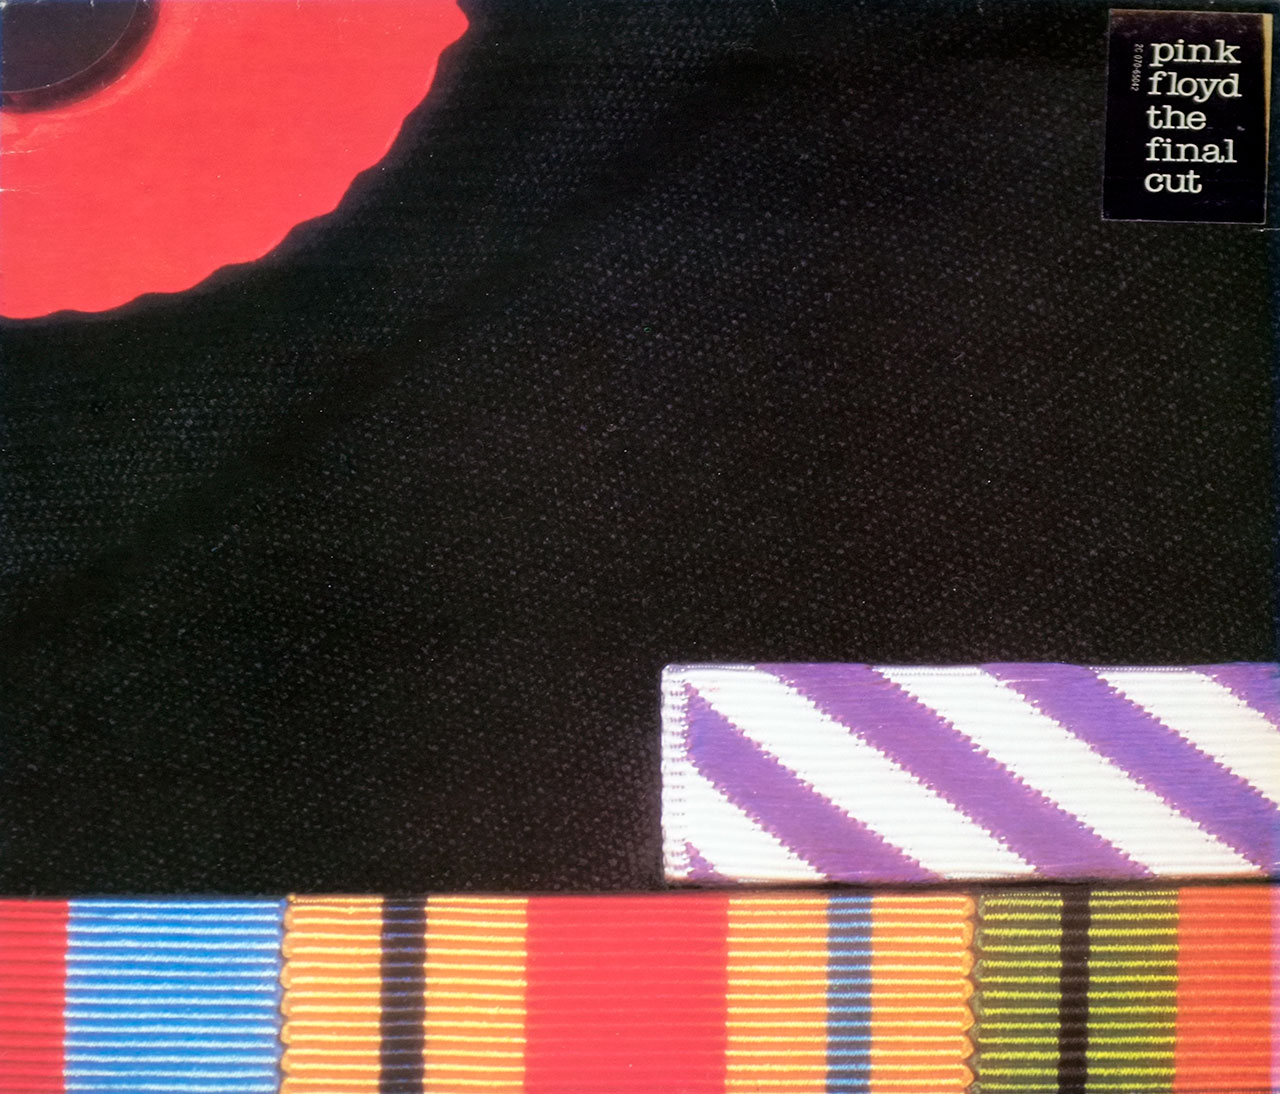 Album Front Cover Photo of PINK FLOYD Final Cut 